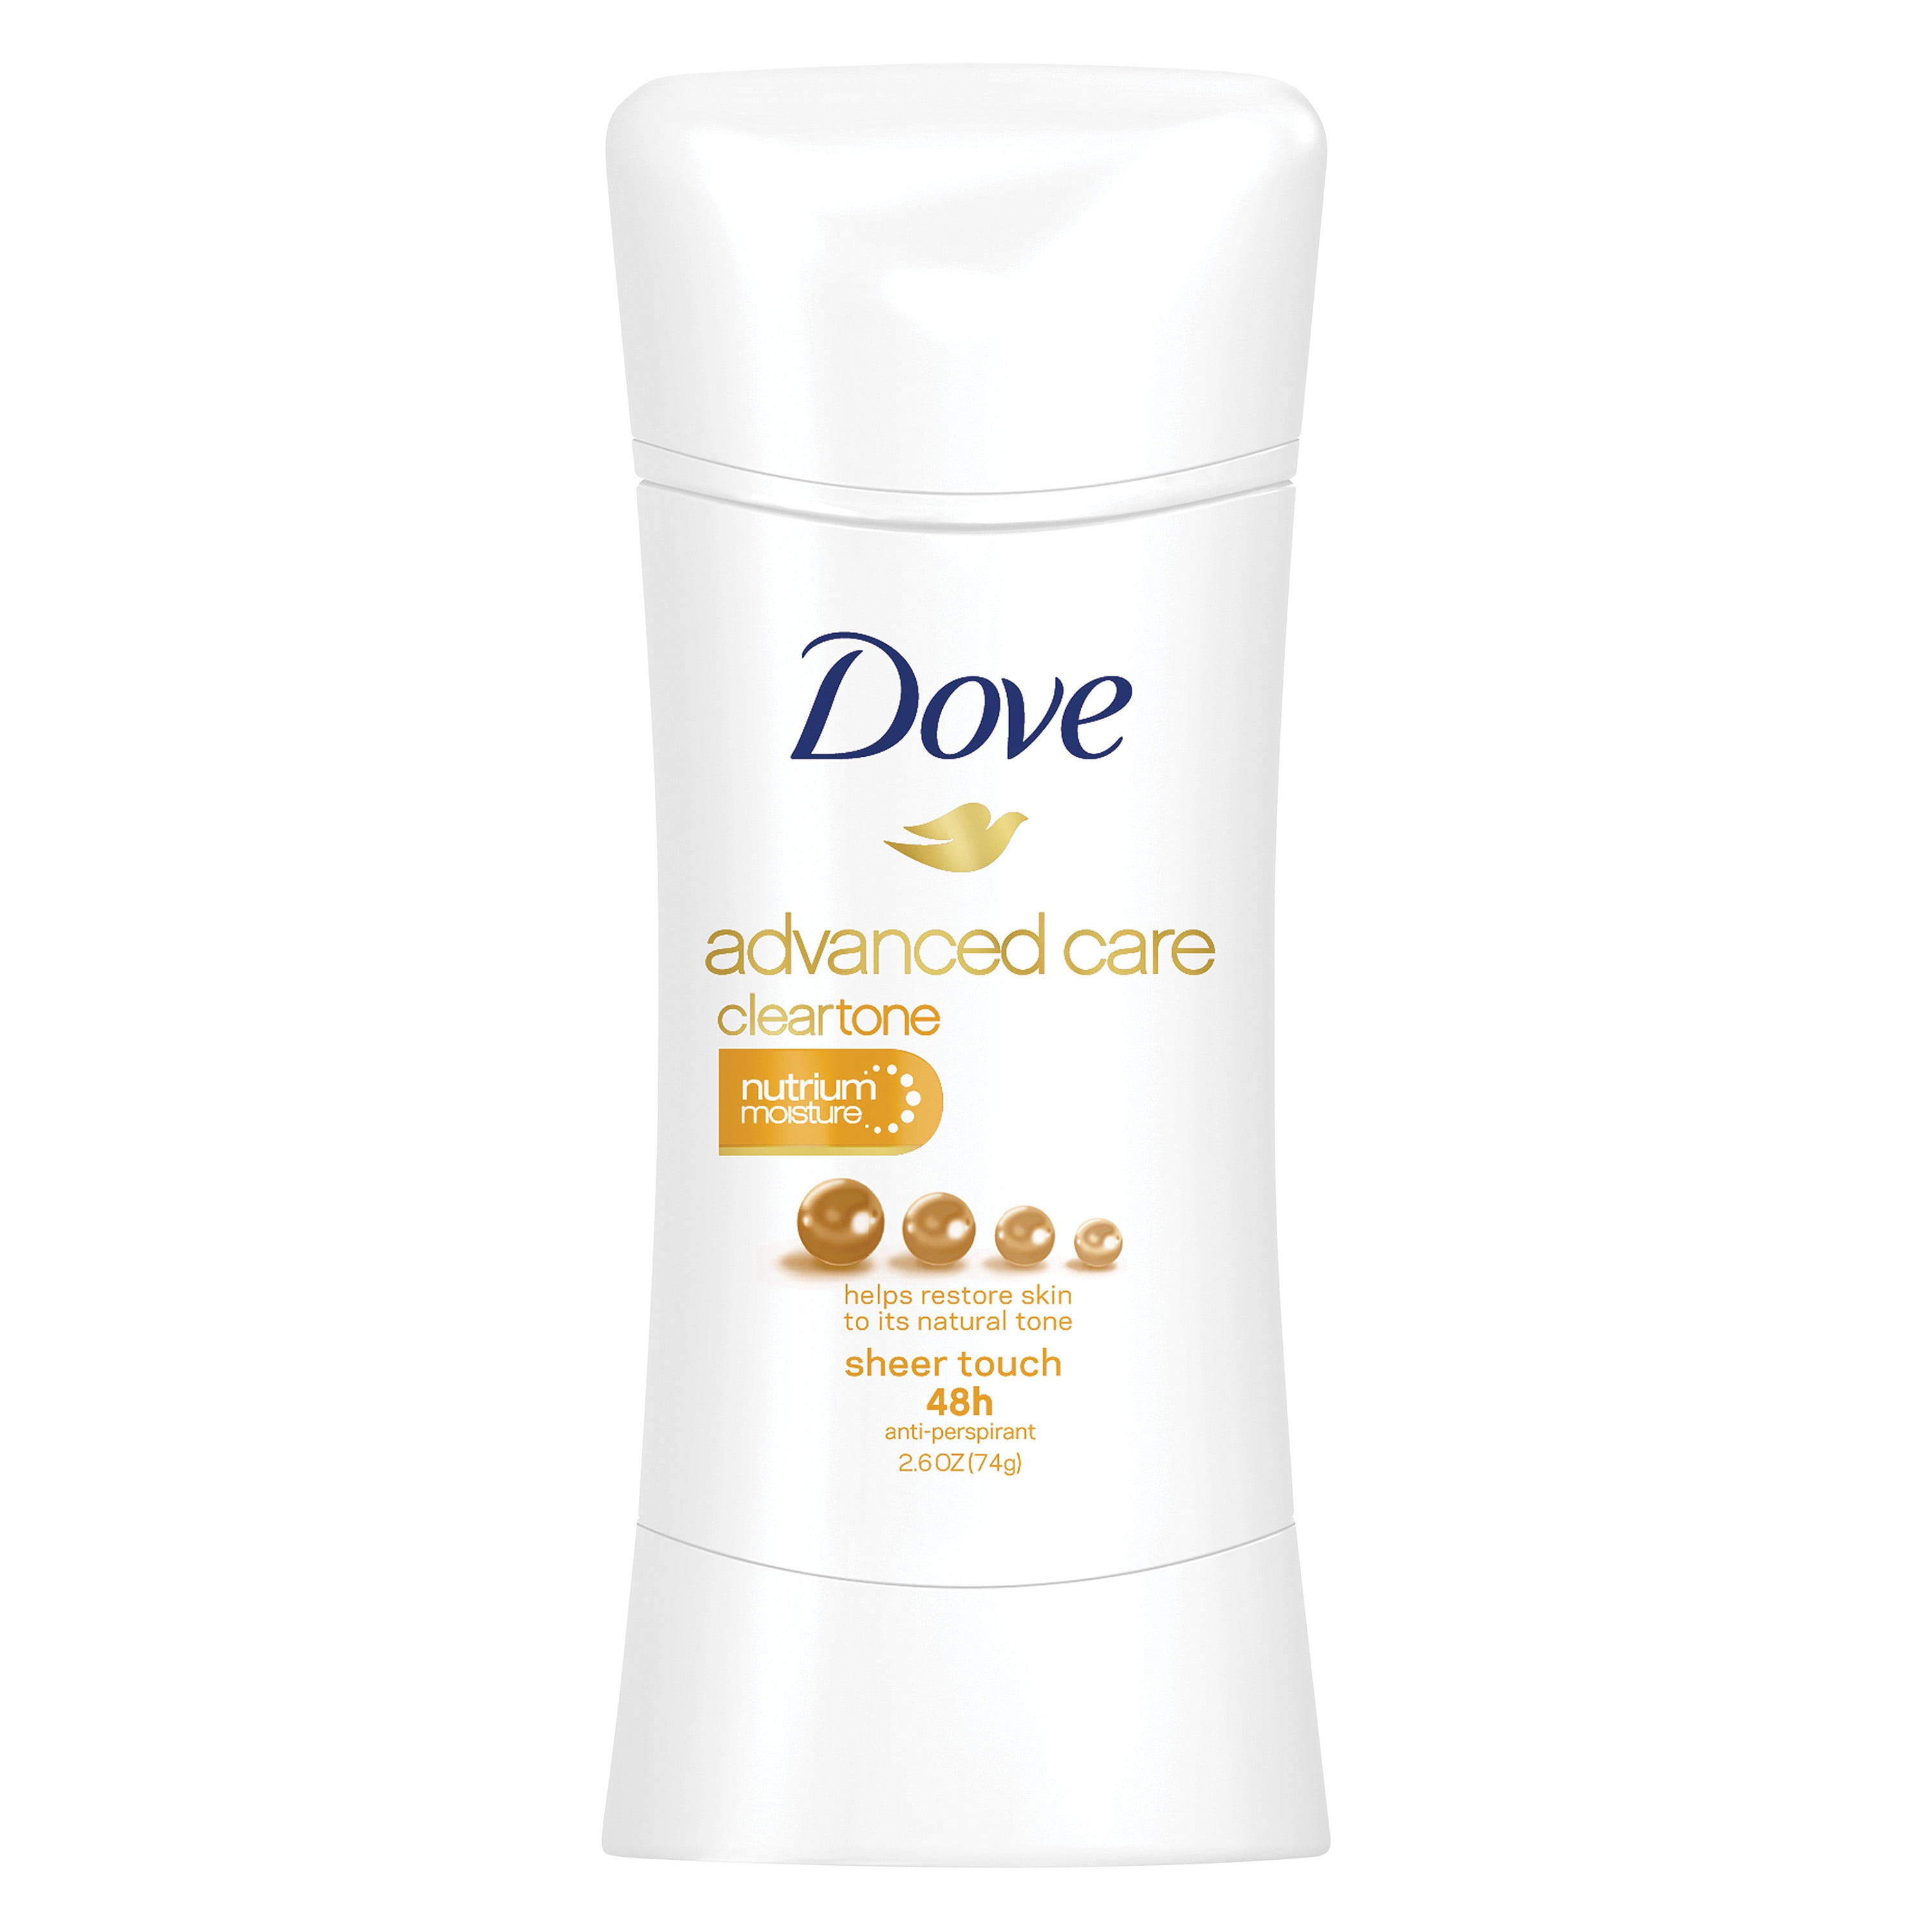 Dove Advanced Care ClearTone Sheer Touch Antiperspirant, 2.6